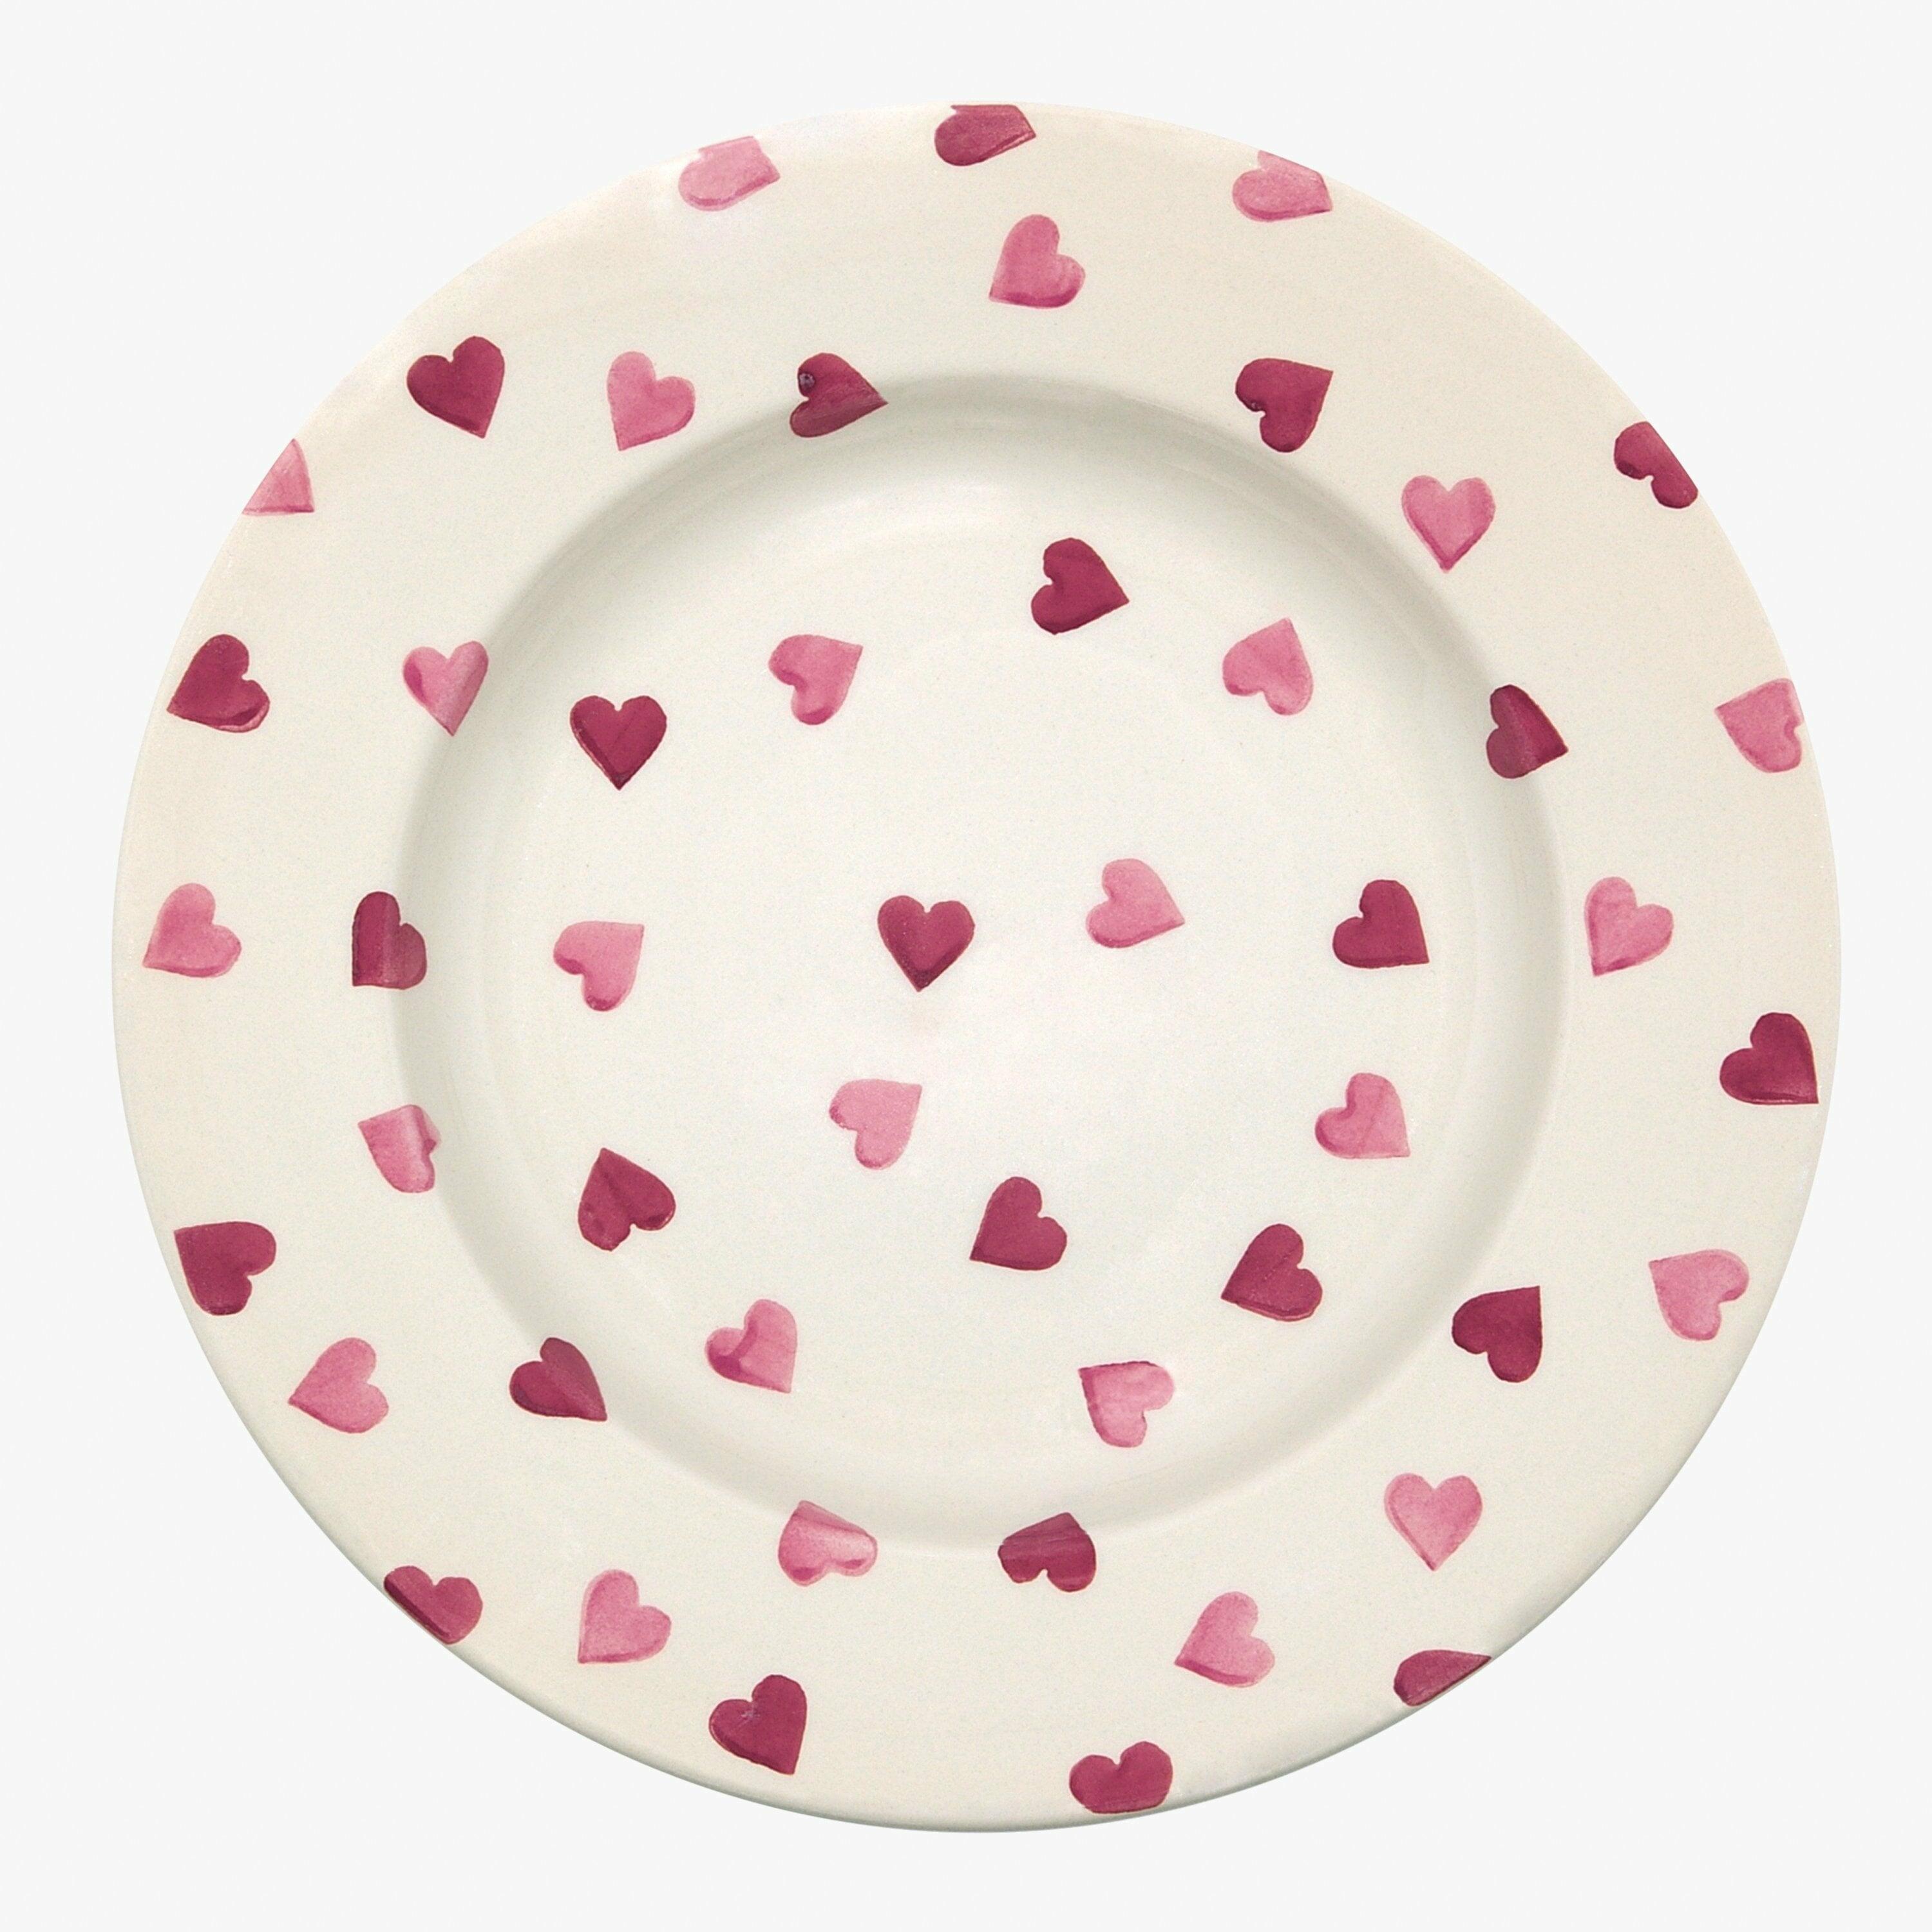 Seconds Pink Hearts 10 1/2 Inch Plate - Unique Handmade & Handpainted English Earthenware British-Made Pottery Plates  | Emma Bridgewater